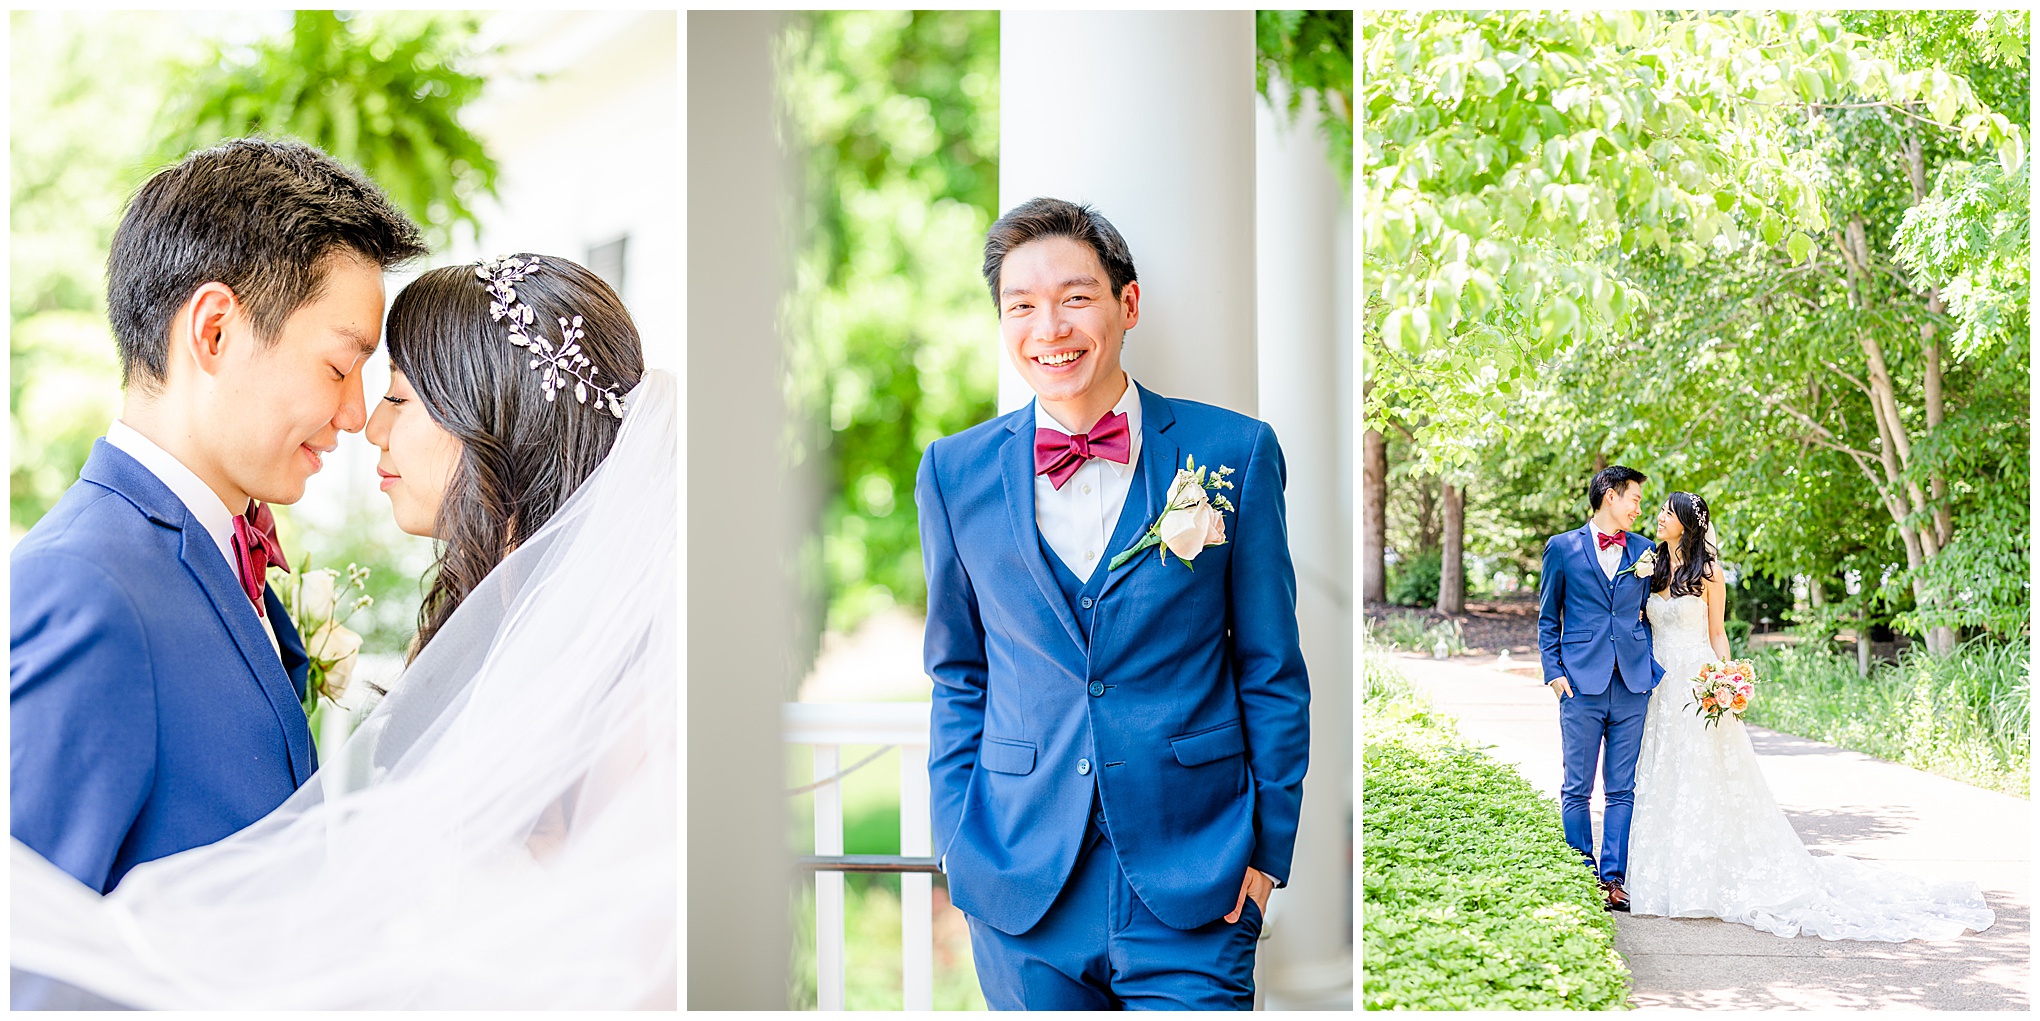 spring Westfields Golf Club wedding, Clifton Virginia wedding, northern Virginia wedding venue, DC wedding photographer, DC photographer, Virginia country club wedding, spring wedding aesthetic, Chinese American wedding, Rachel E.H.Photography, bride and groom under brides veil, bride and groom on pathway